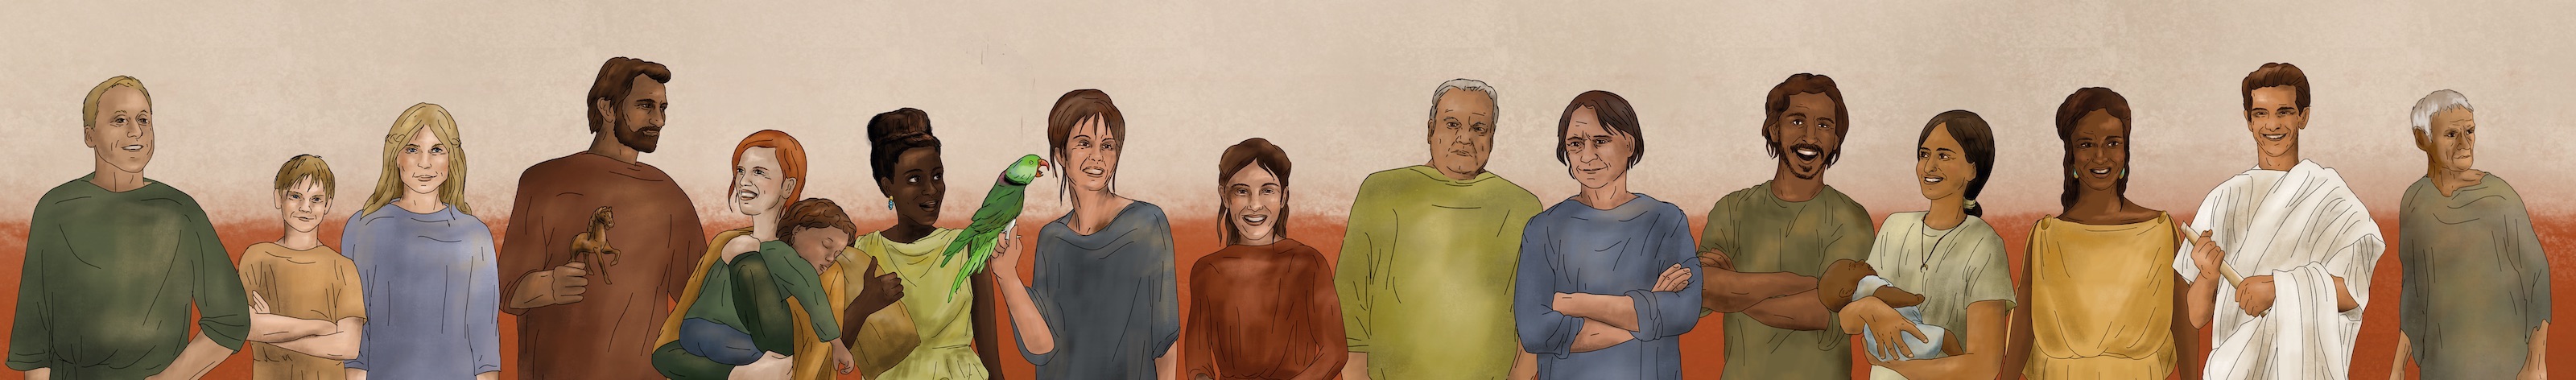 Characters from Suburani.